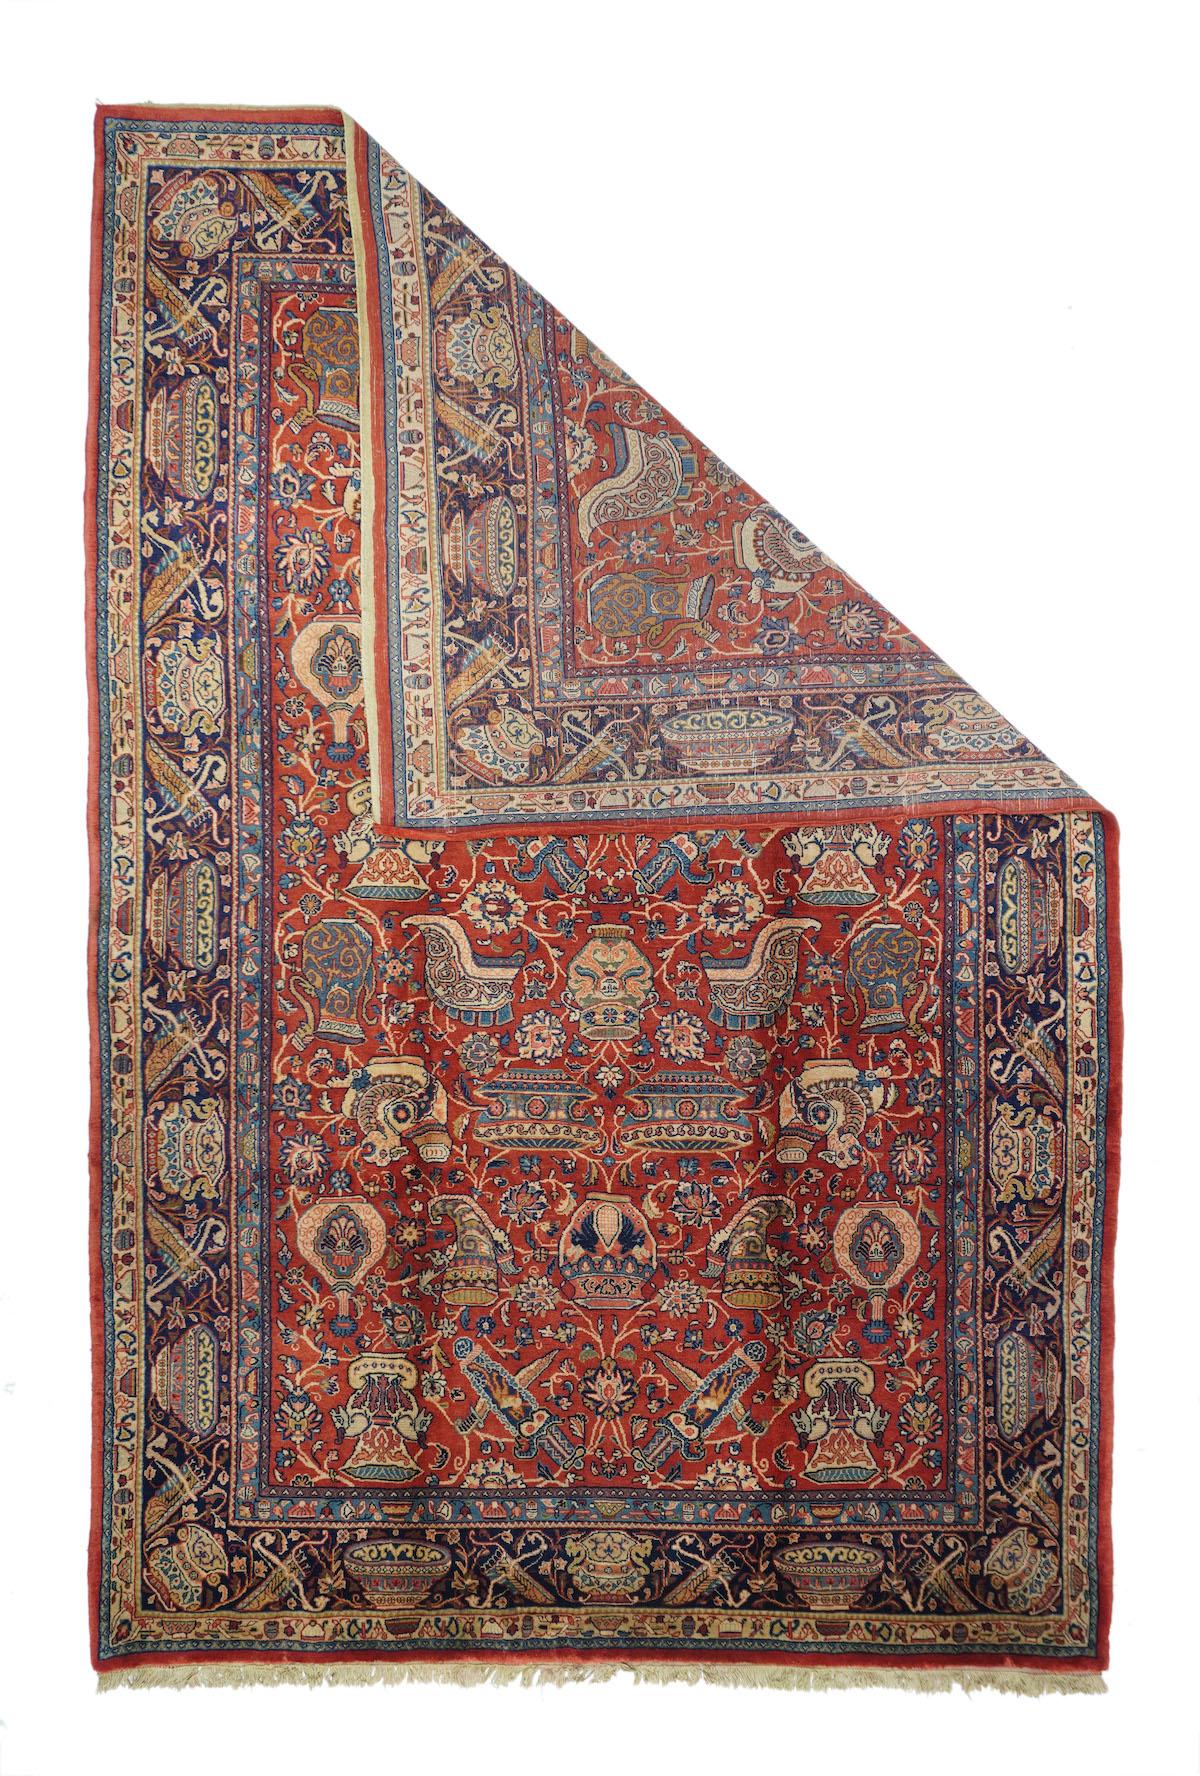 Fine Antique Persian Sarouk Rug 6'11'' x 10'11''. This is one very unusual carpet! The red field displays bottles, vases, swords, daggers, helmets, drinking horns and various other accoutrements, with vinery, leaves and palmettes passing round and